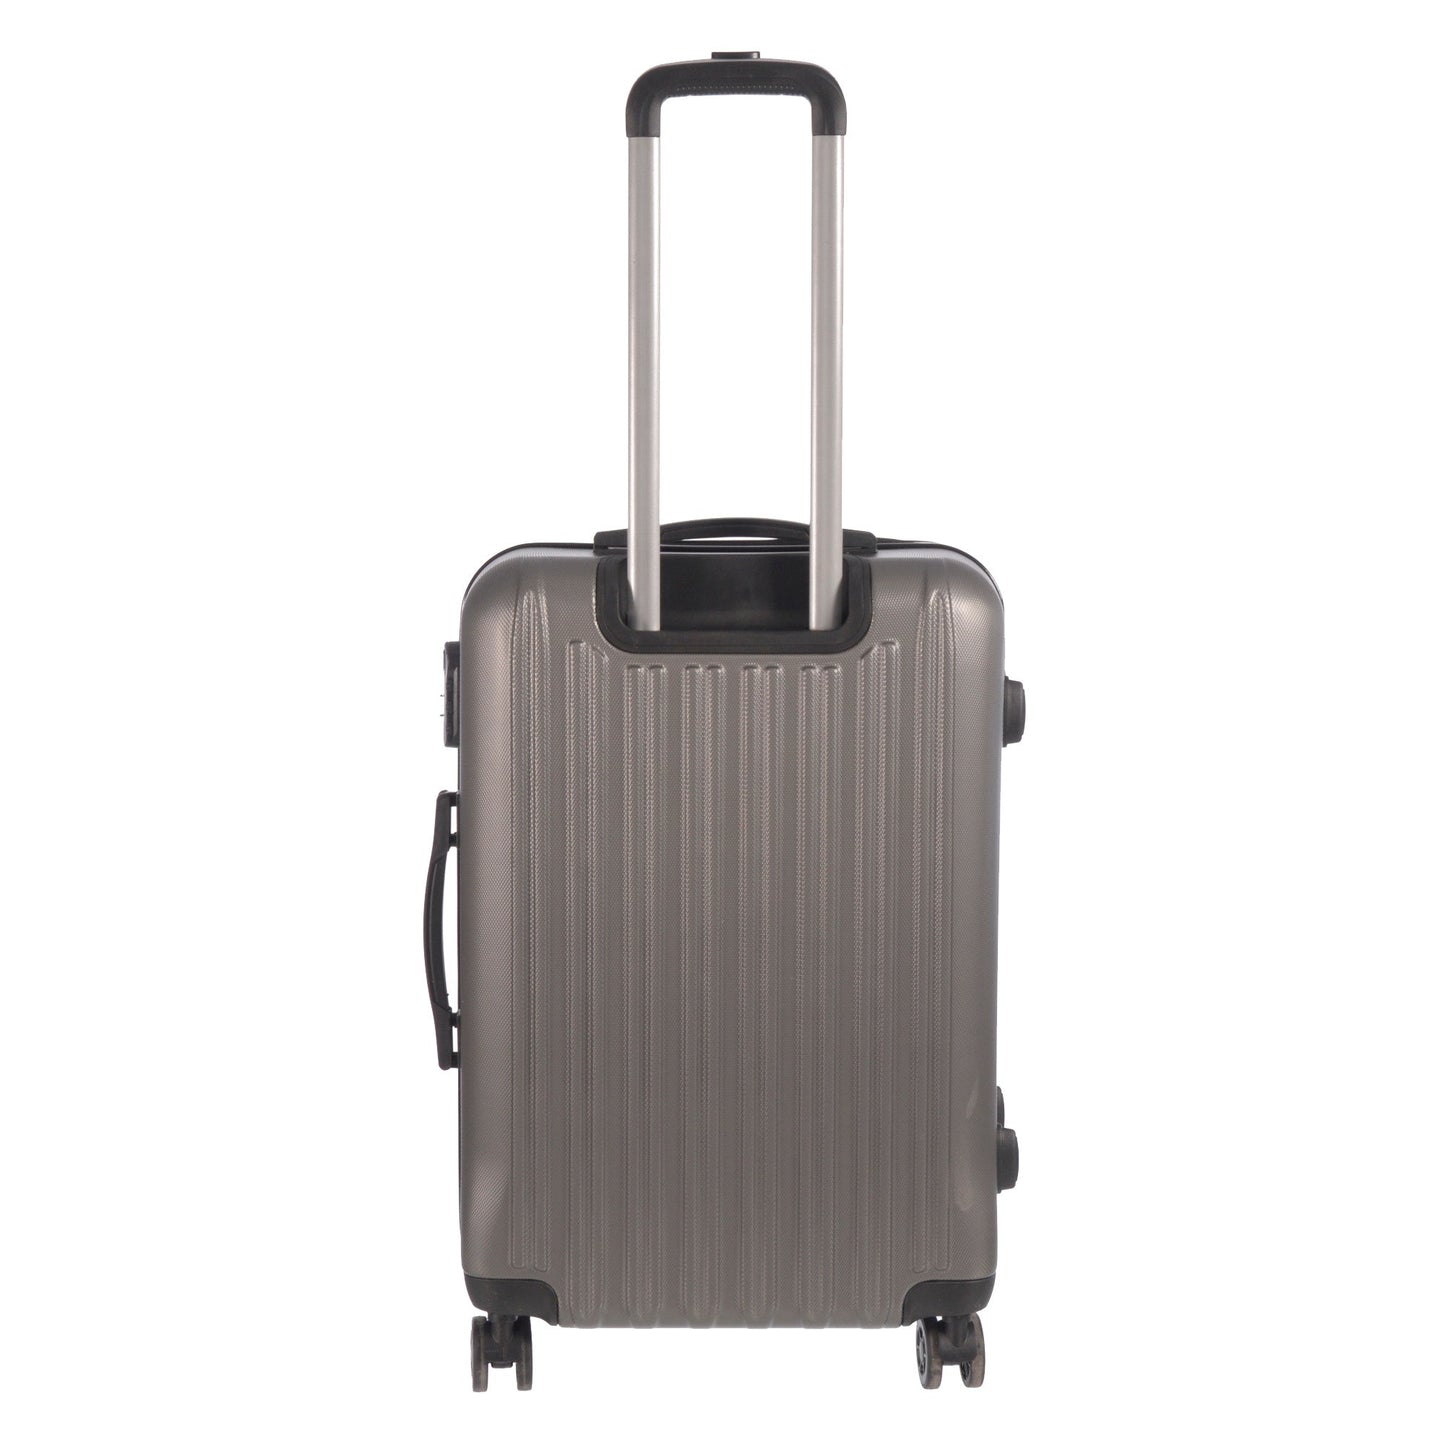 24" Medium Size Luggage Grove Collection